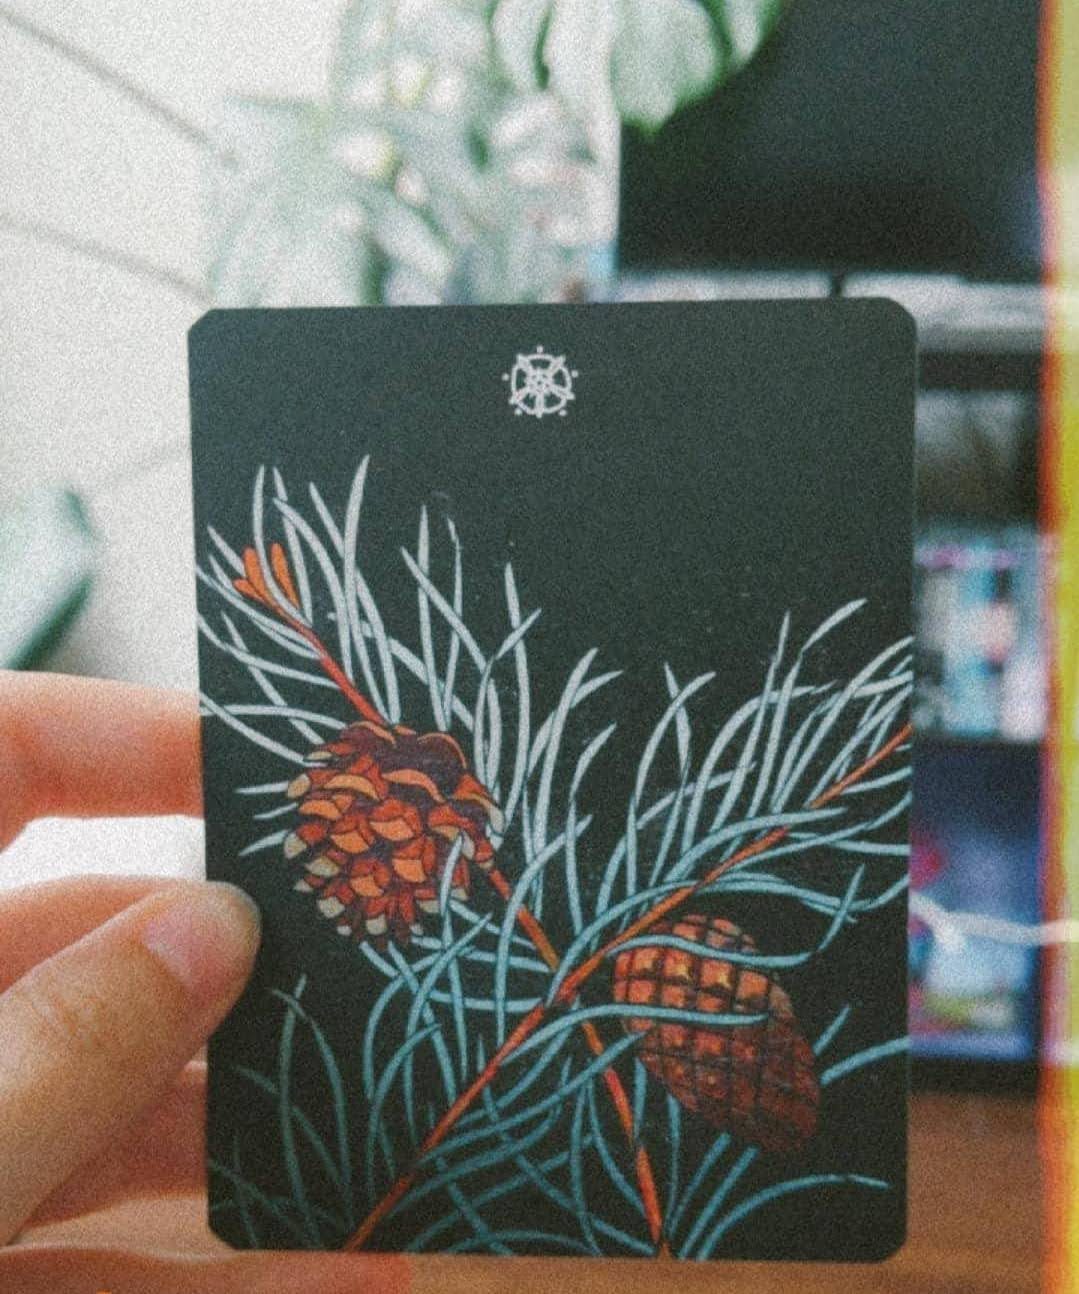 A hand holding a card. On the card are two pine branches, crossing int eh middle, with pinecones hanging on the upper parts. The card has a black background and a symbol at the top.